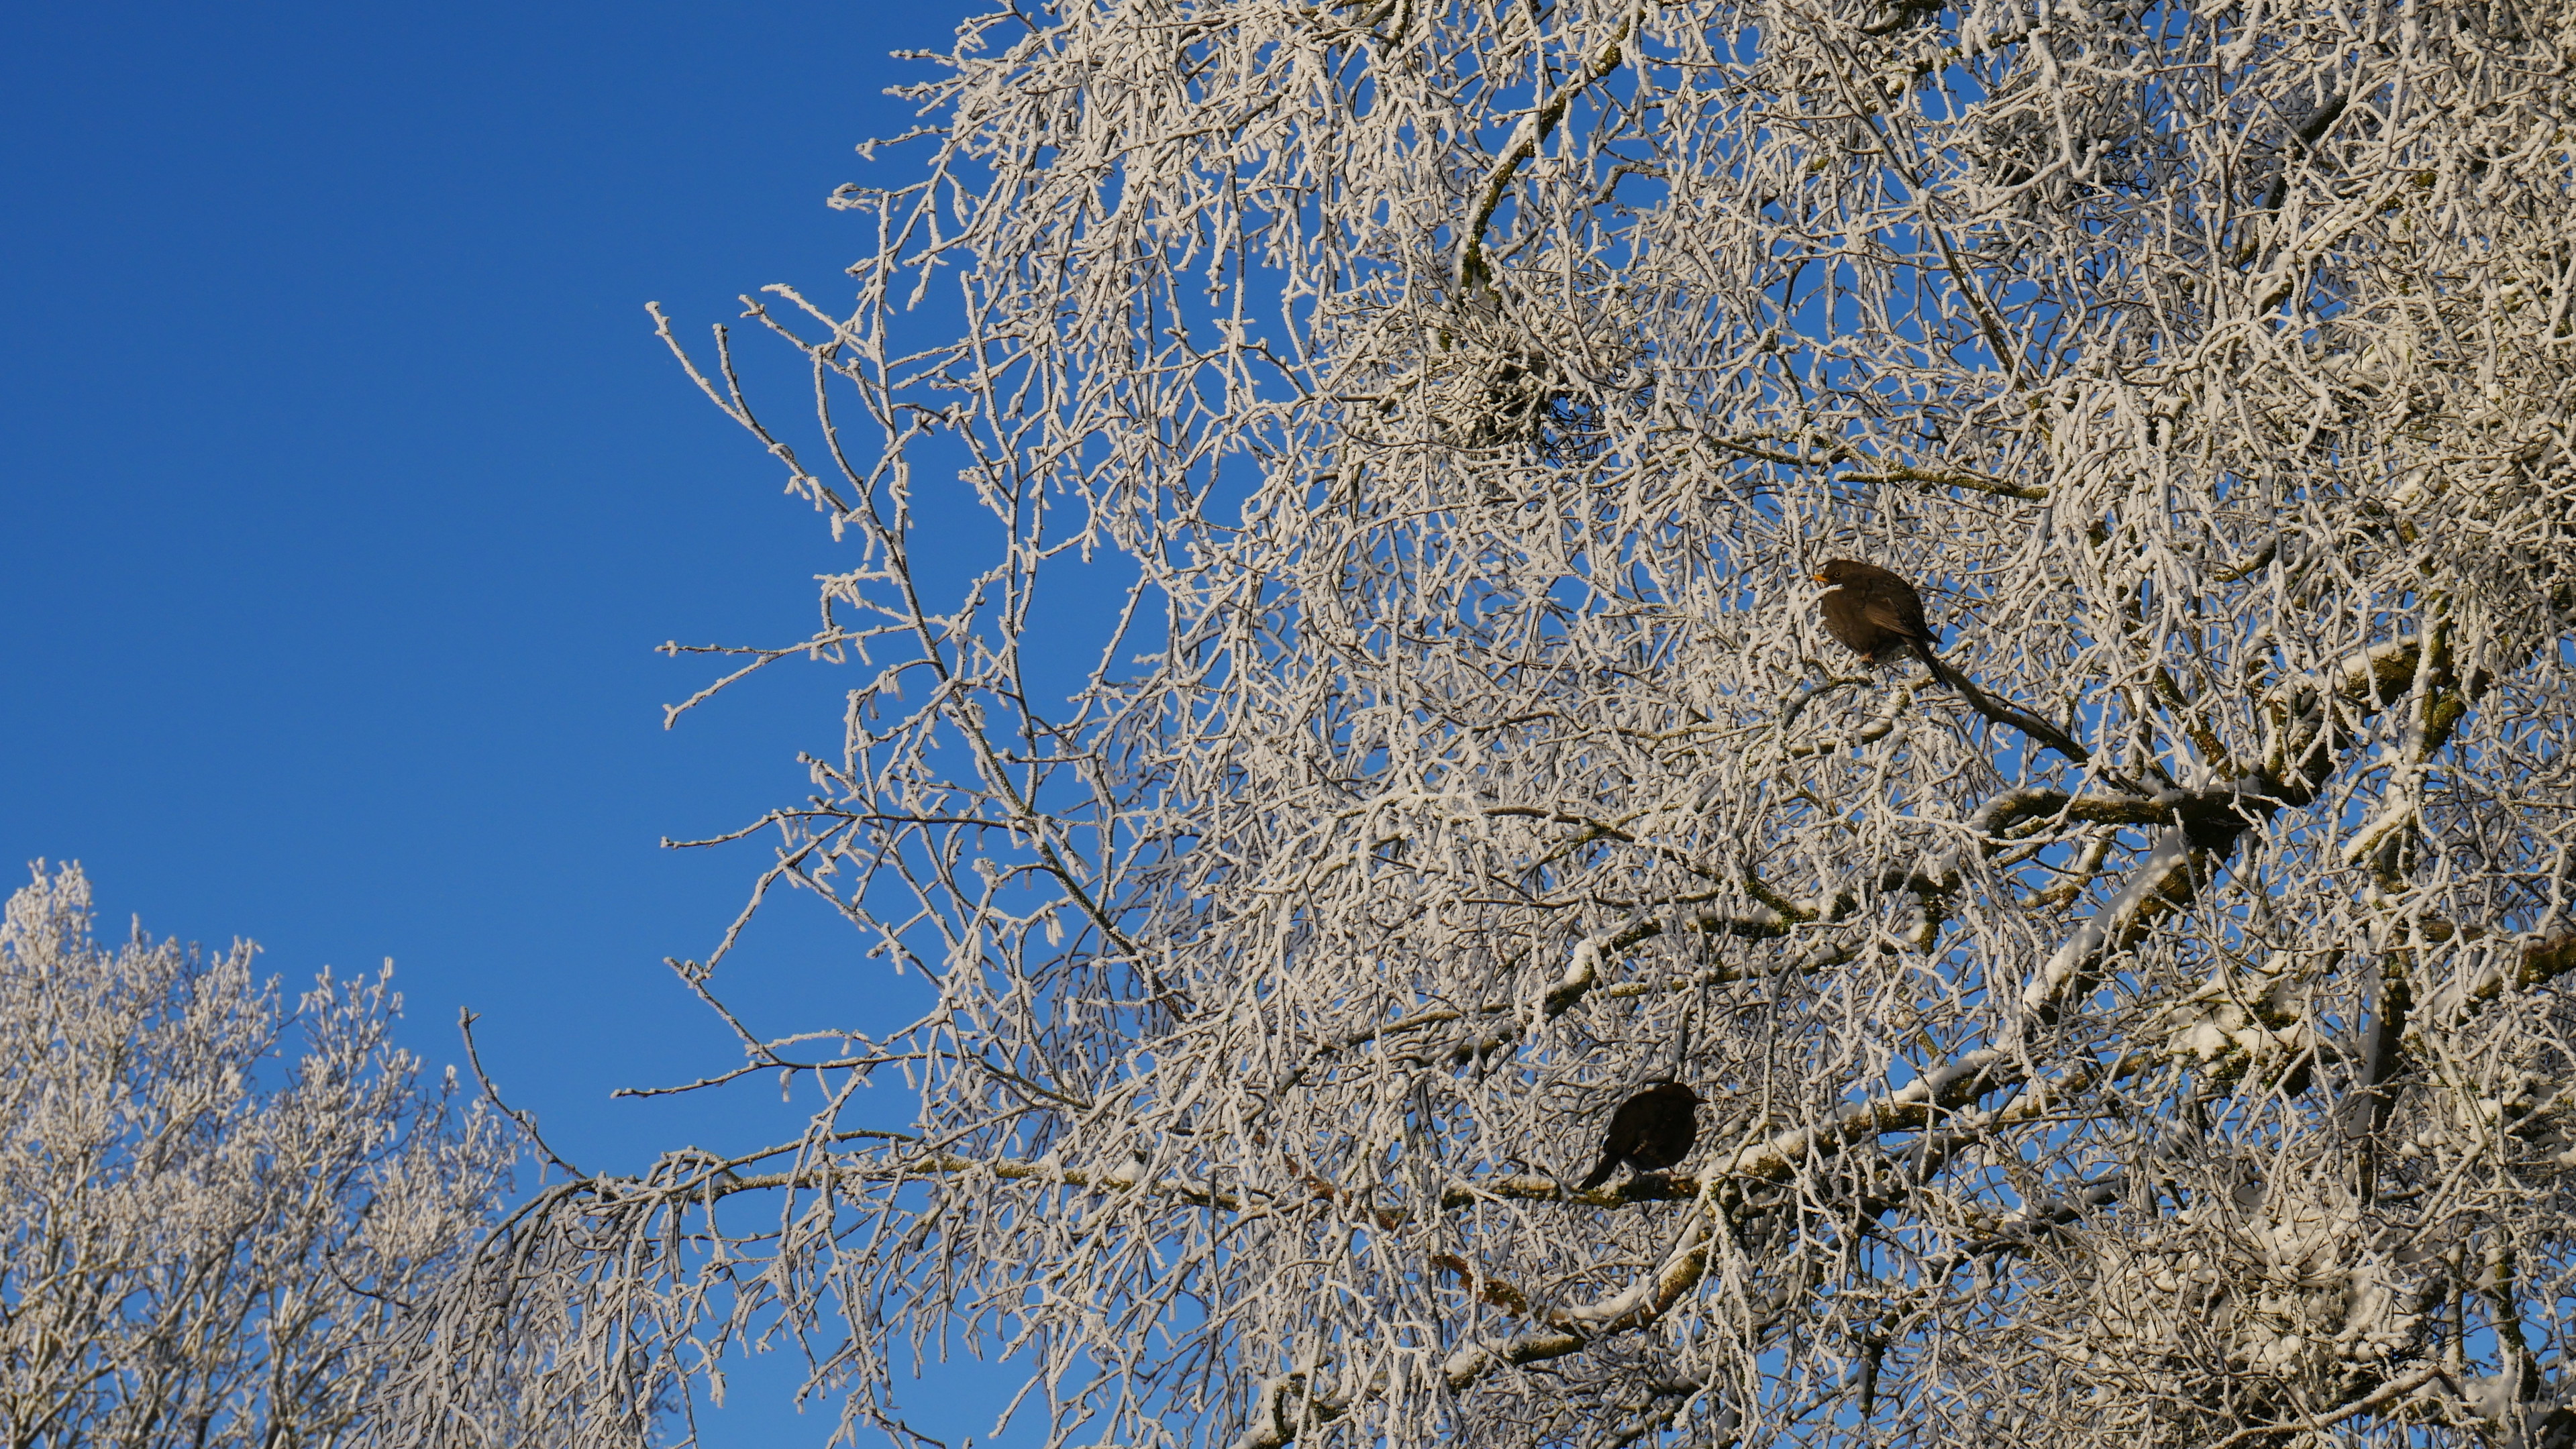 radiant blue sky with a birch tree covered in snow and two blackbirds in foreground